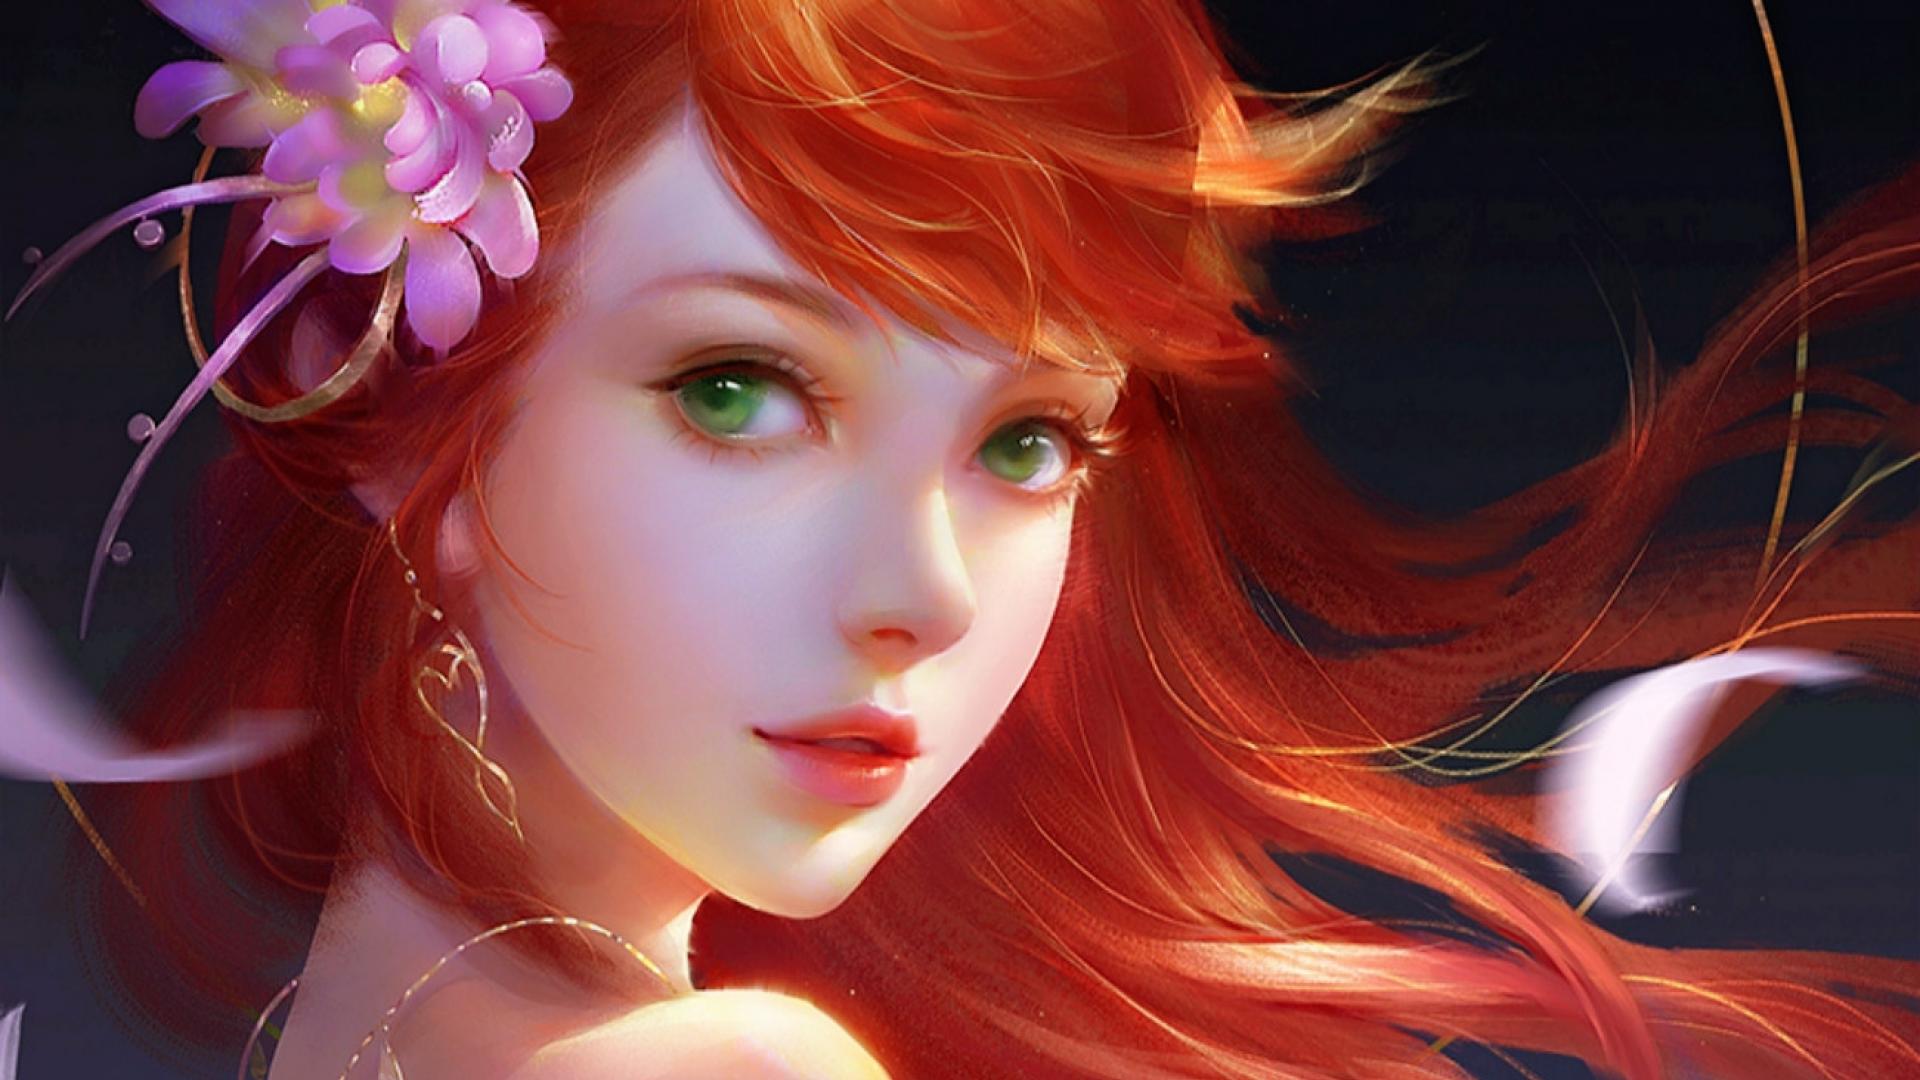 Fantasy Redhead with Green Eyes HD Wallpaper. Background Image